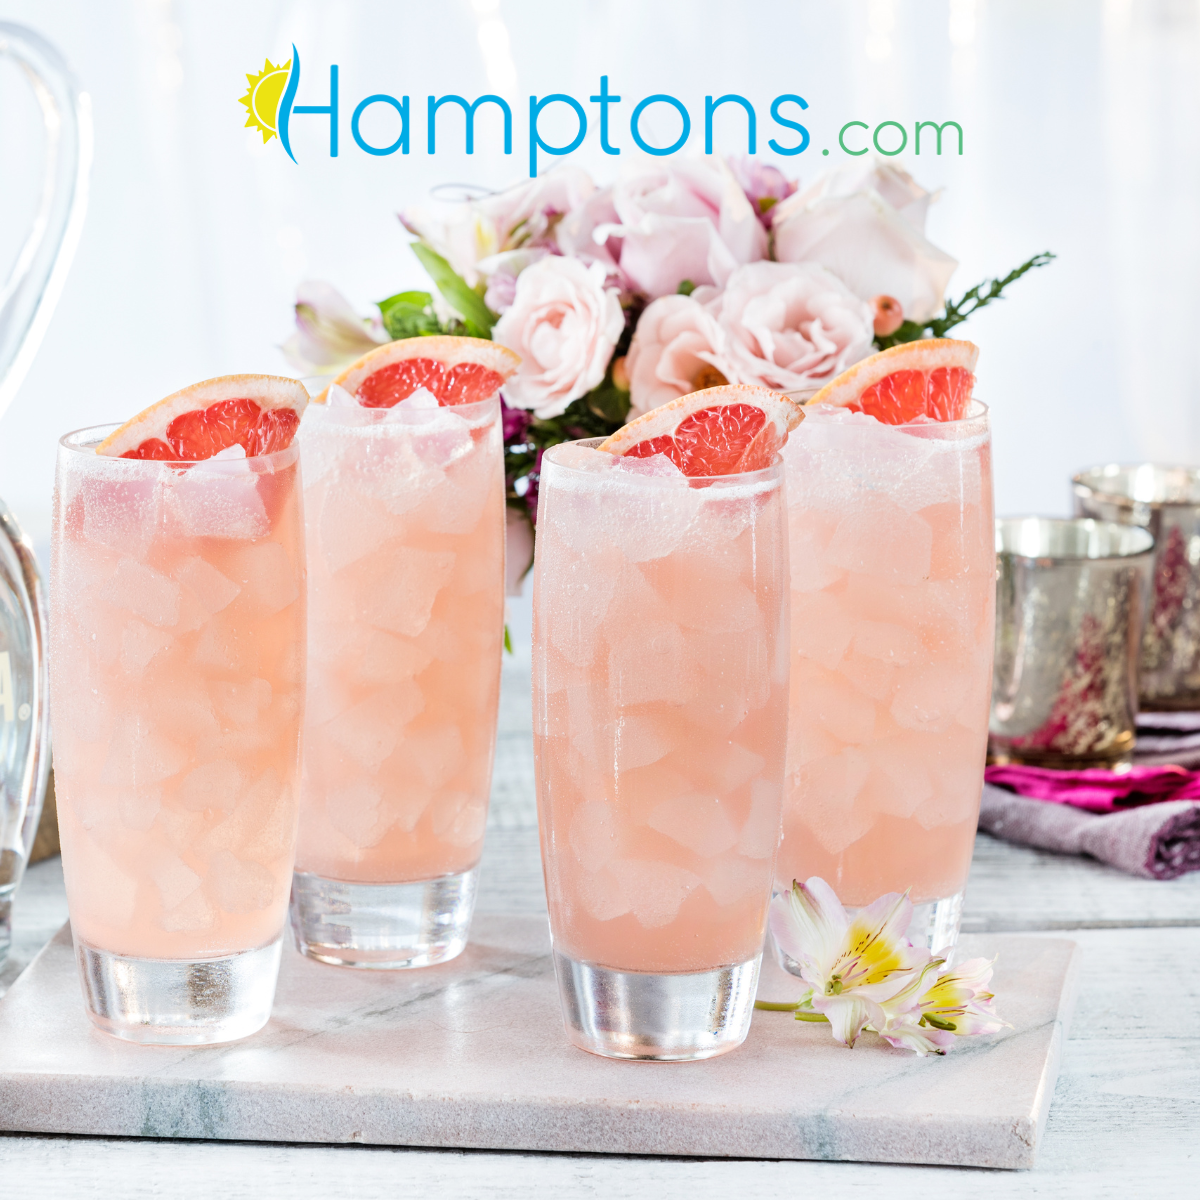 HAMPTONS - TGIF Because it's National Tequila Day